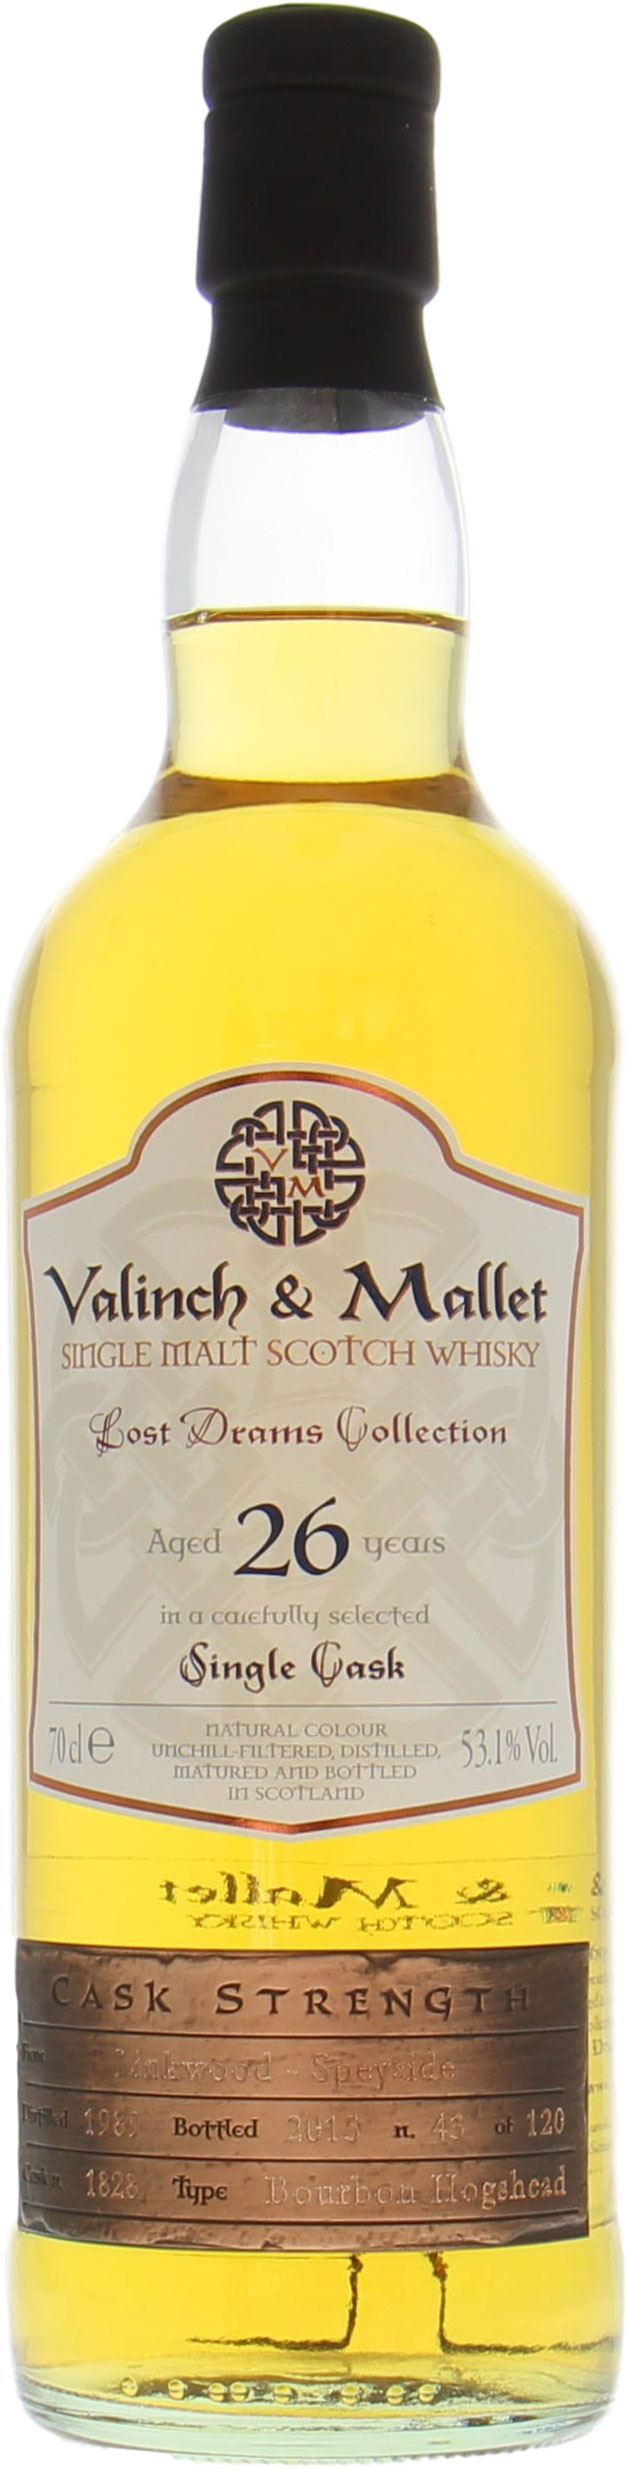 Linkwood - 26 Years Old Valinch & Mallet Lost Drams Collection Cask 1828 53.1% 1989 Perfect